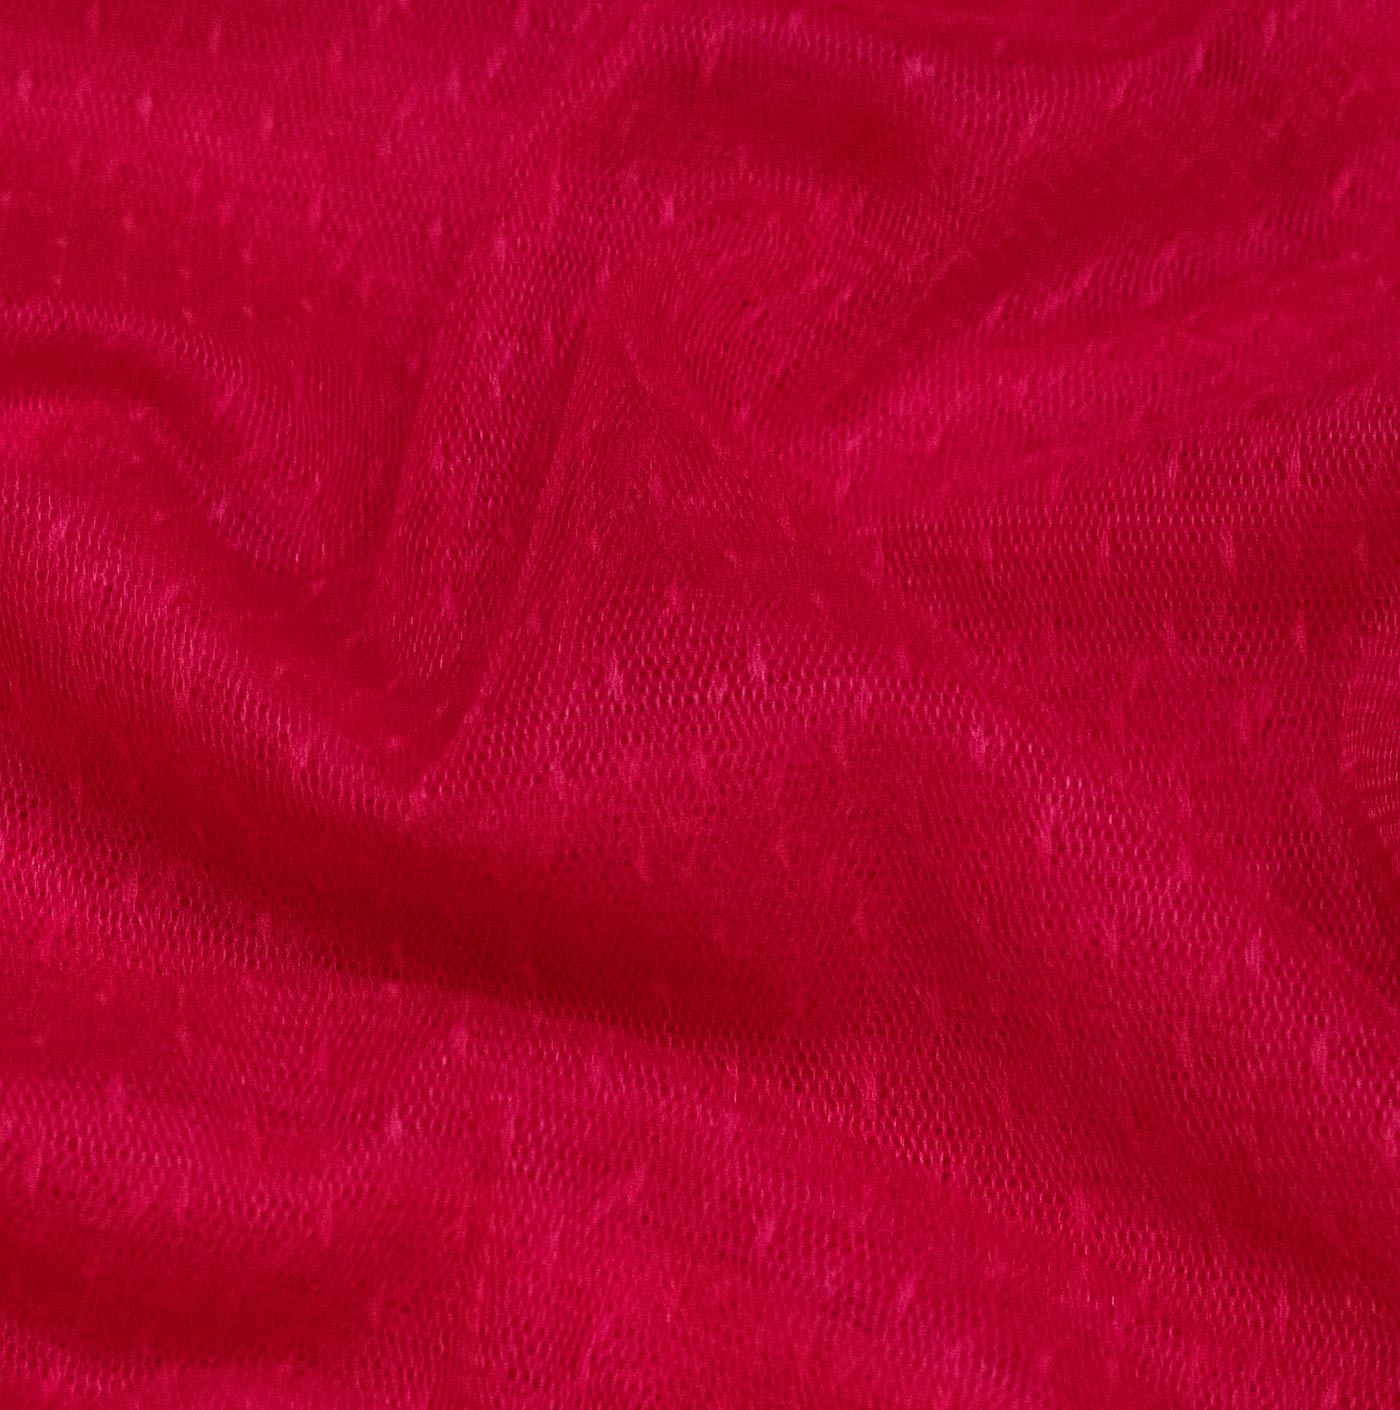 Red Dotted Mesh Fabric